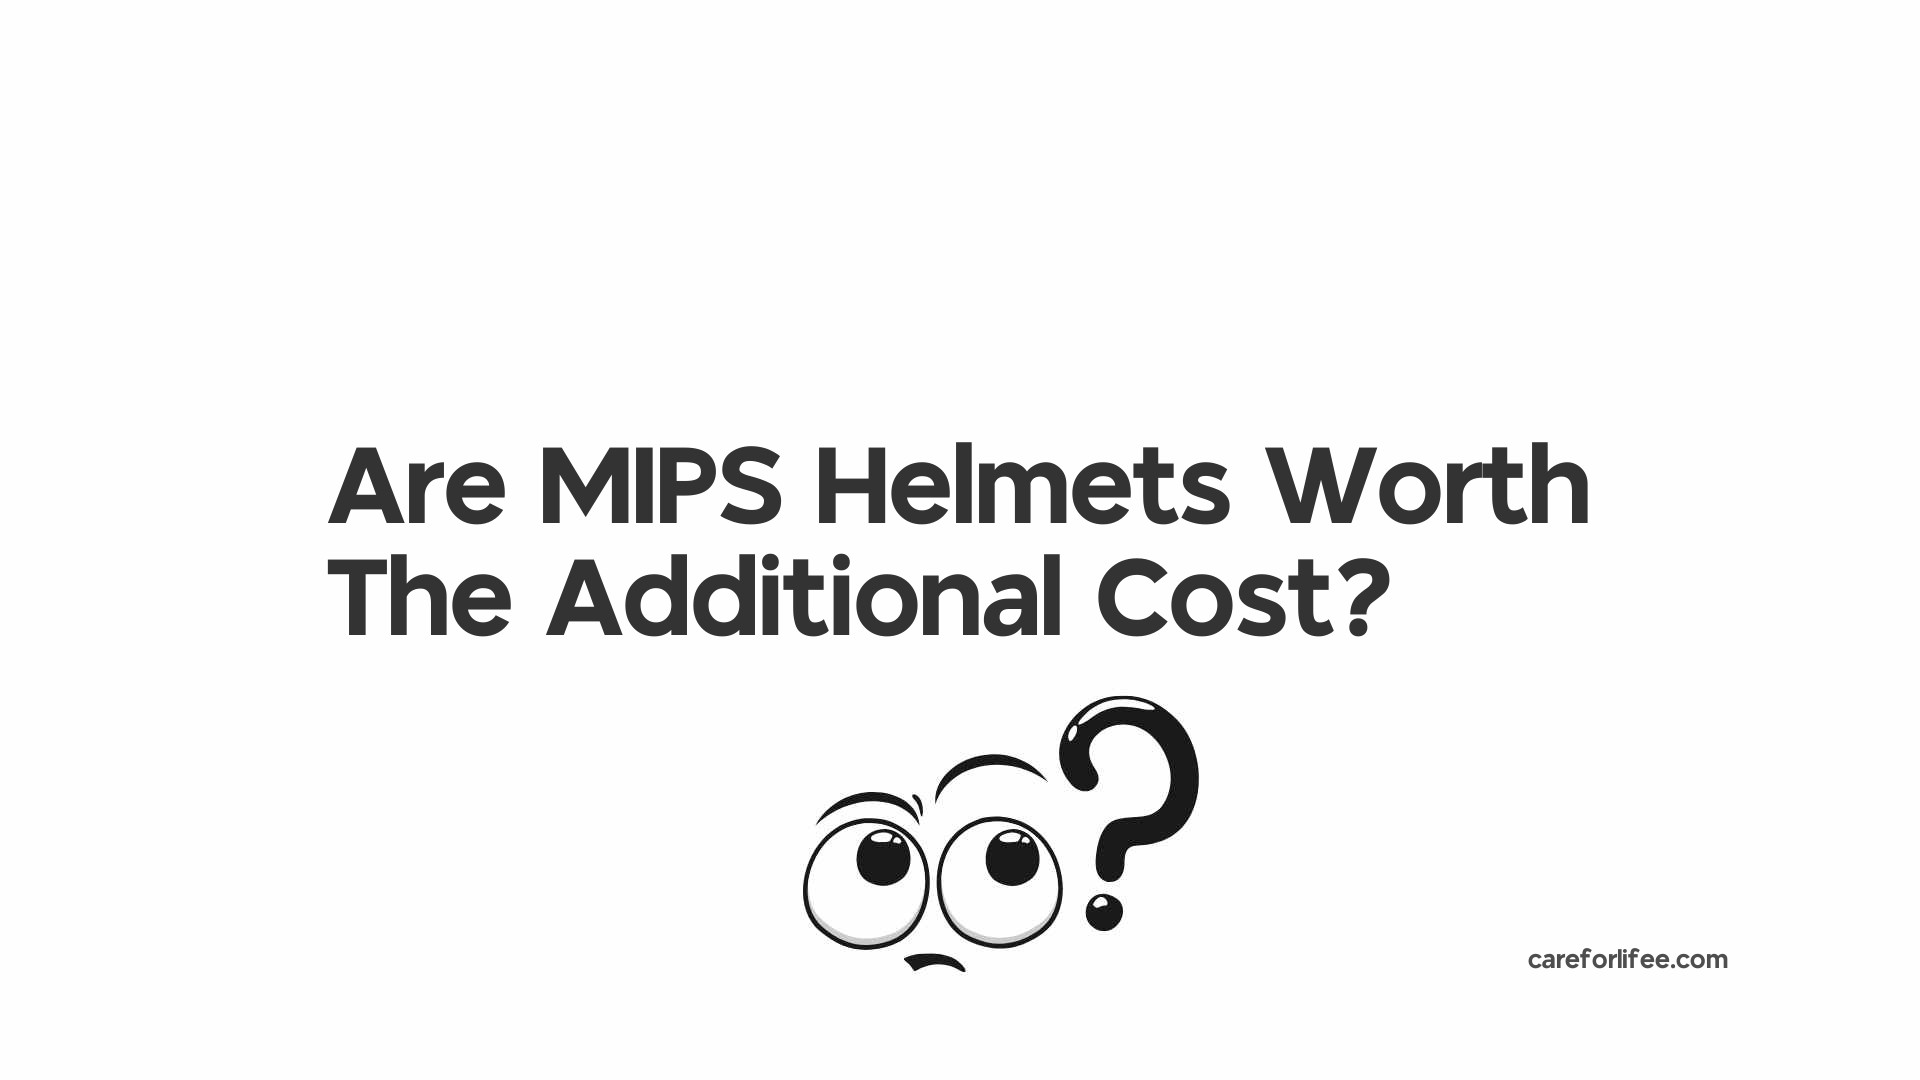 Are MIPS Helmets Worth The Additional Cost?